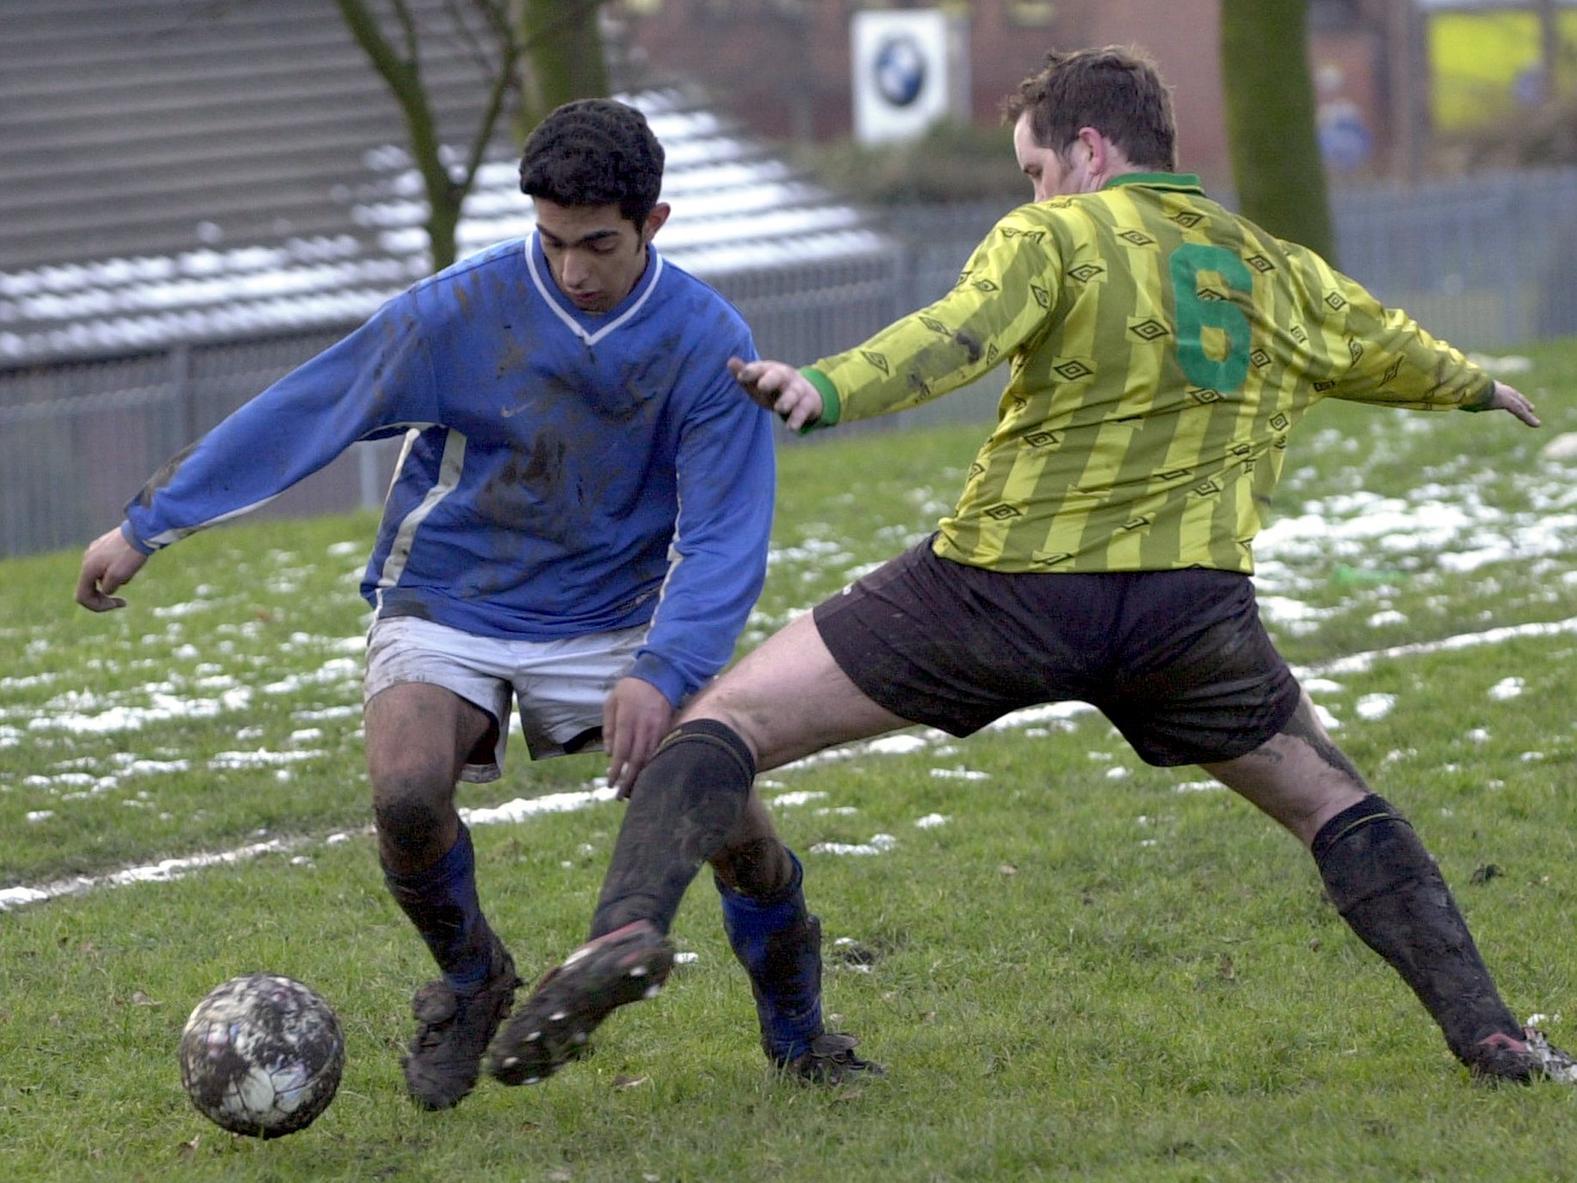 Naveed Altaf of Street Works takes on Jimmy Allan of F.C Headingley.